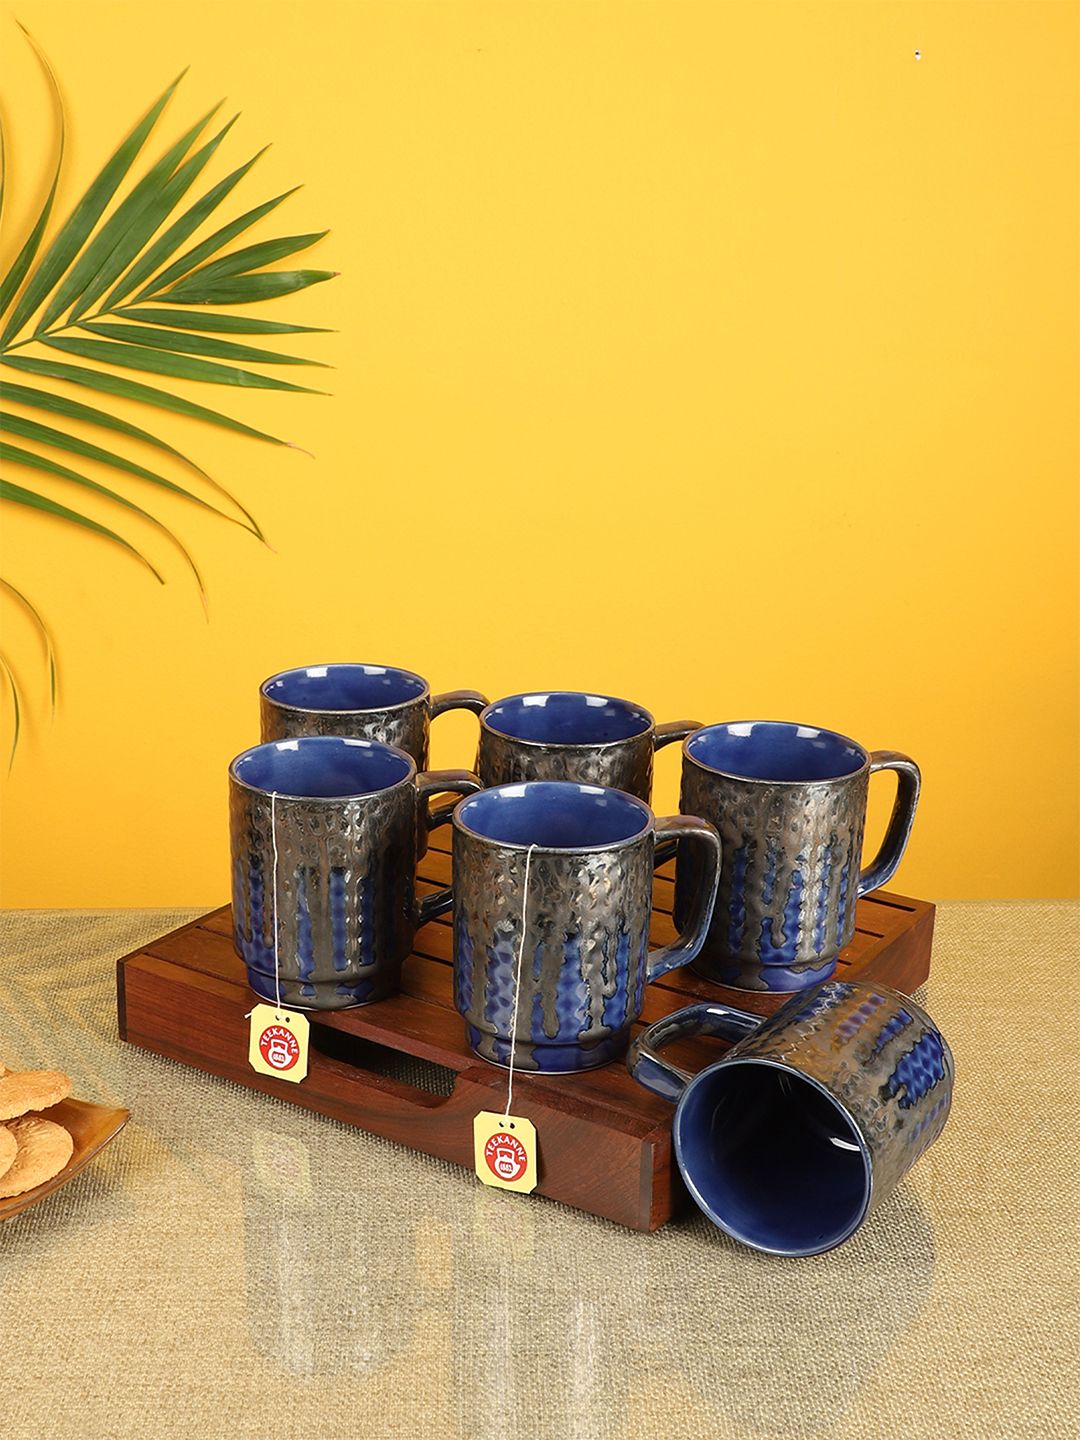 AAKRITI ART CREATIONS Blue & Grey Textured Ceramic Glossy Cups Set of 6 Cups and Mugs Price in India